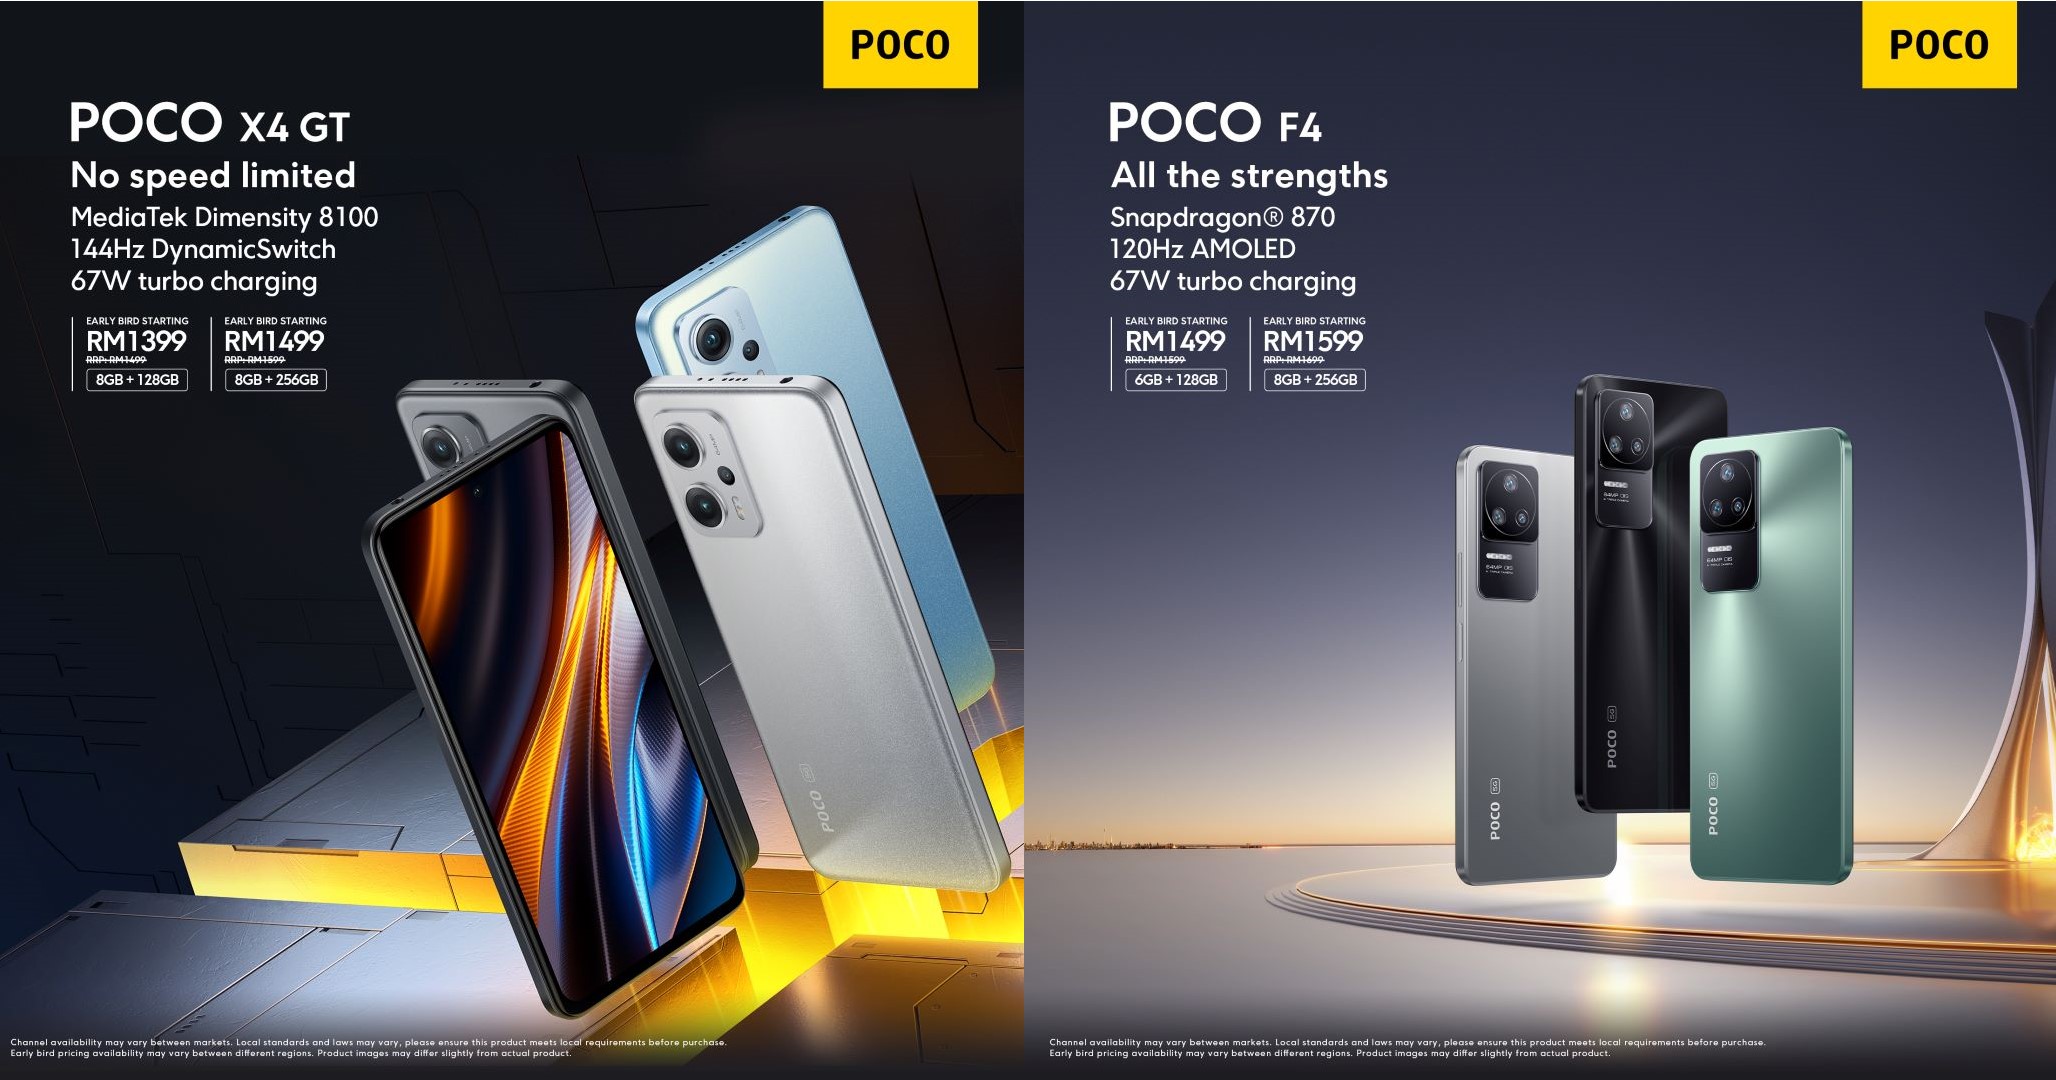 POCO F4 5G makes its global debut with a powerhouse chipset